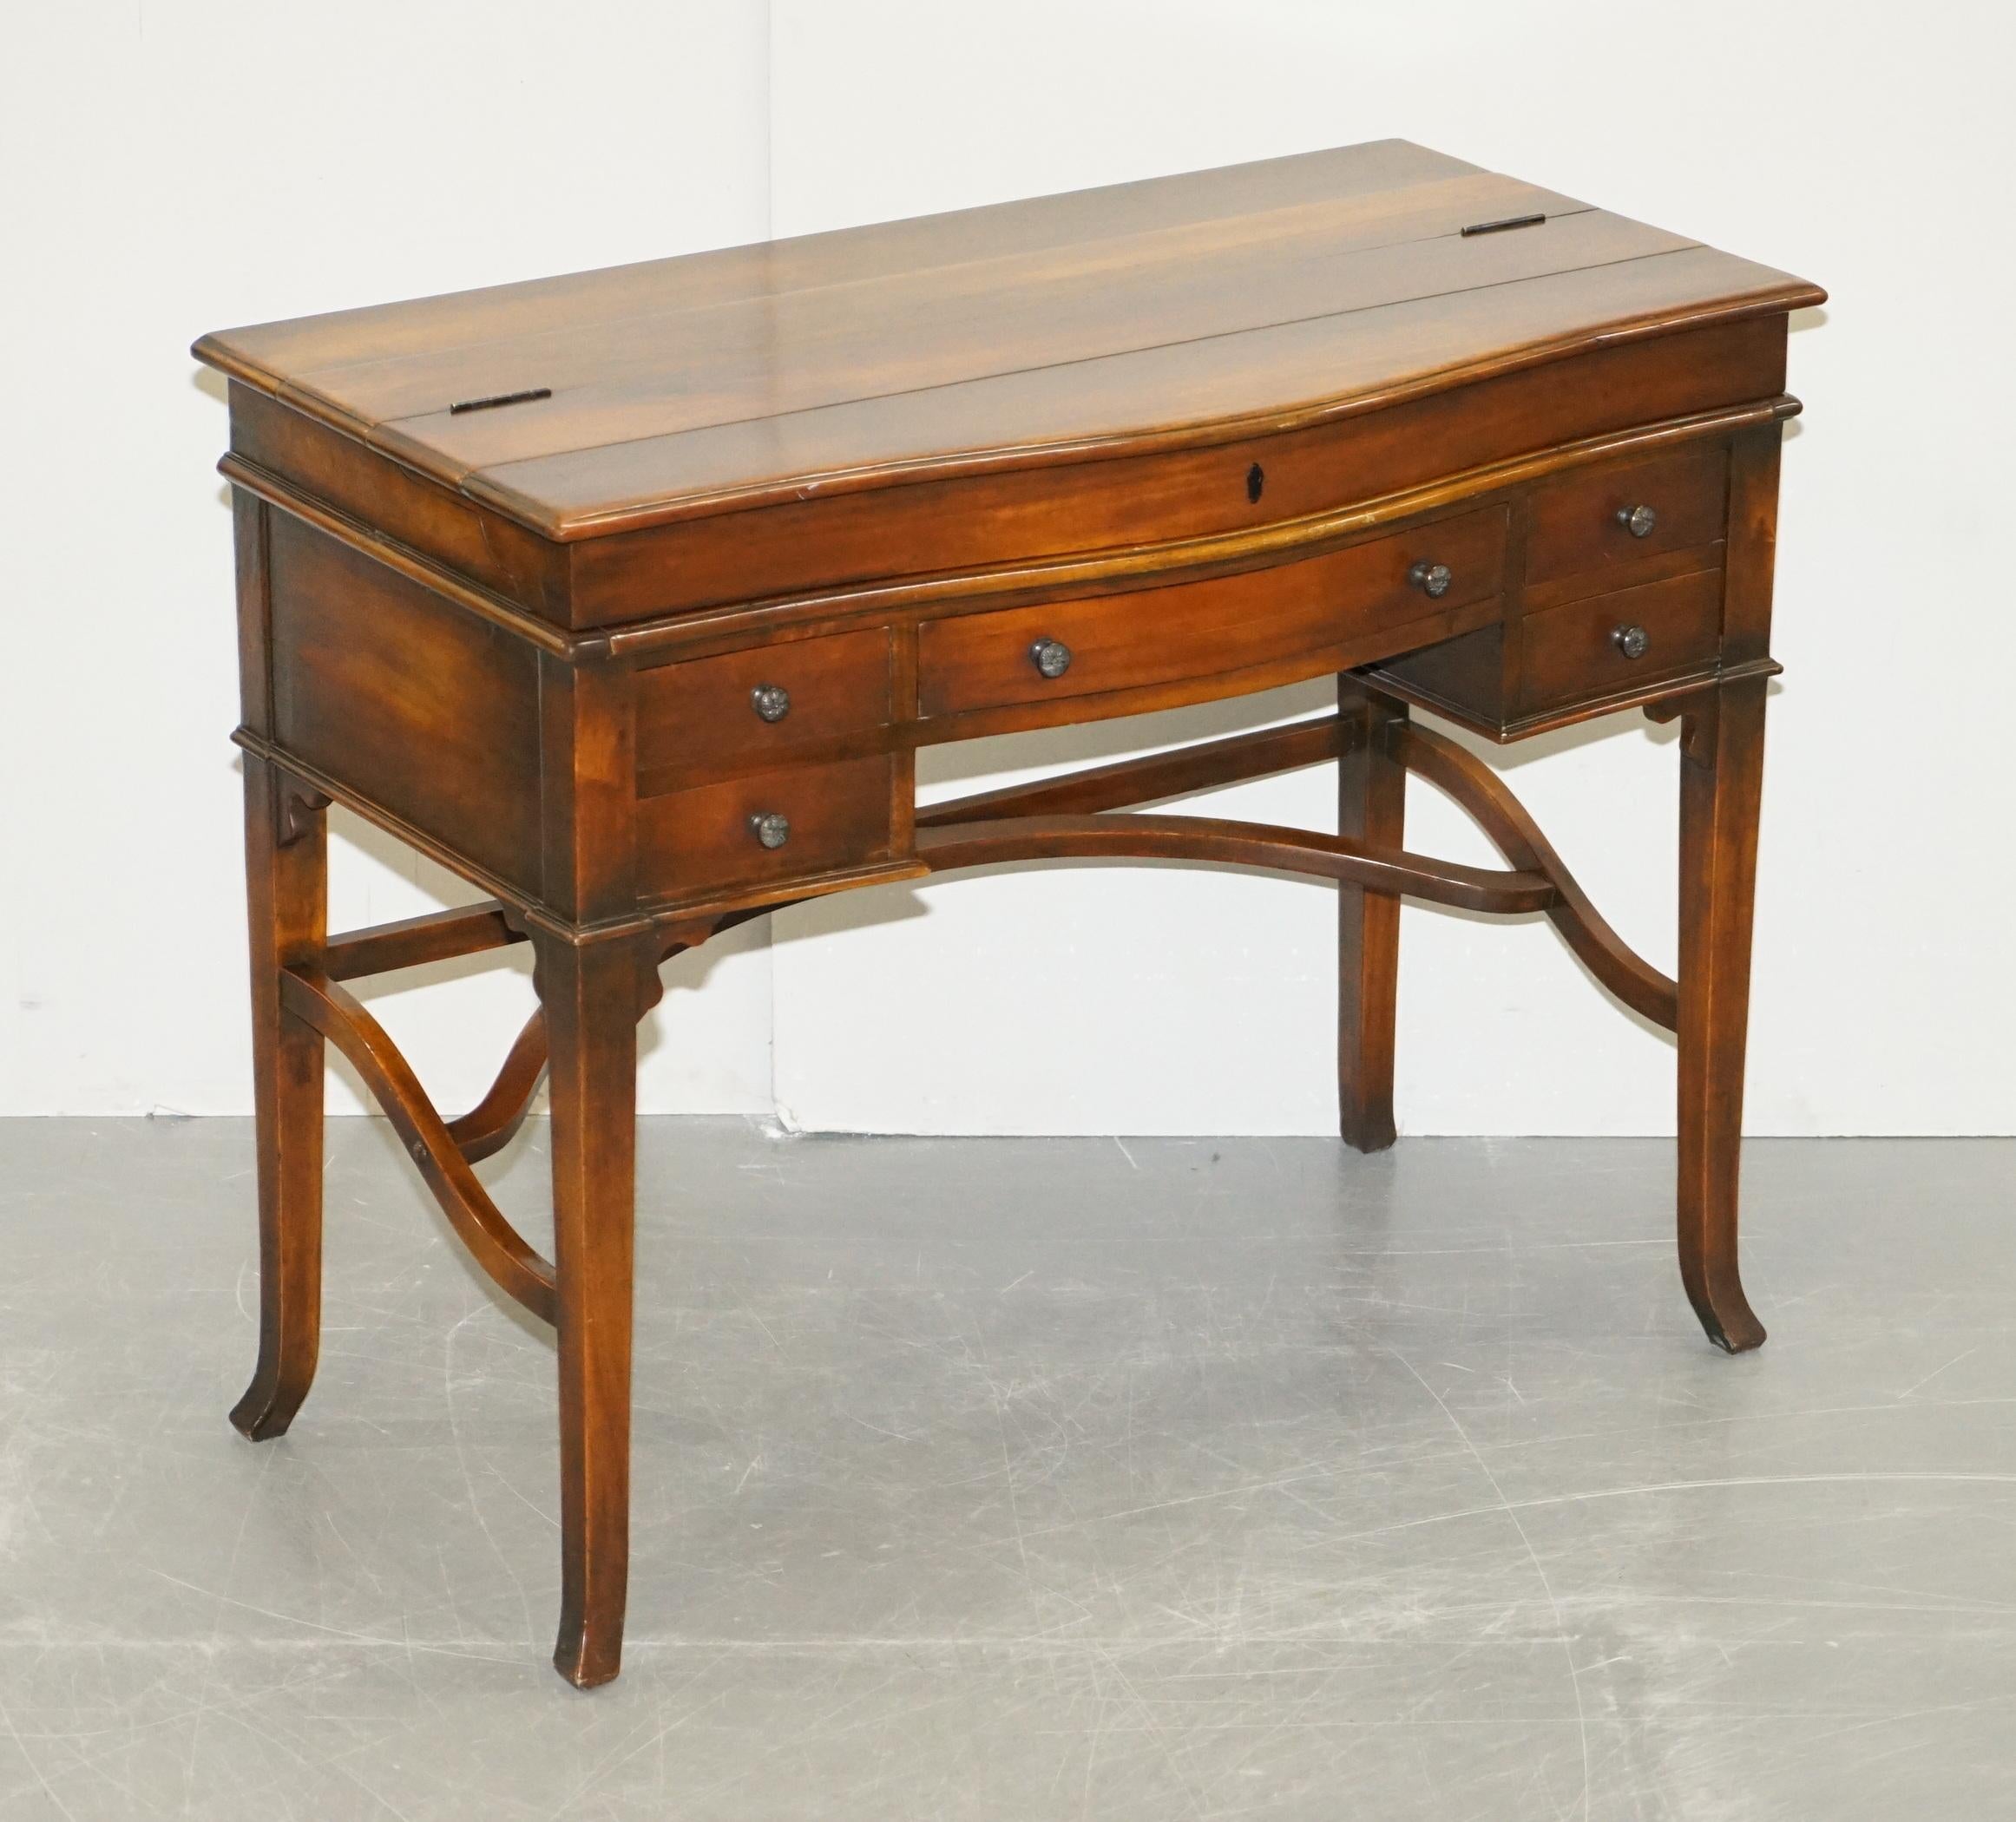 We are delighted to offer for sale this stunning Theodore Alexander military campaign style fold out writing desk or work station

An exquisite looking and very well made piece. The desk can be used either folded or unfolded, this is the largest